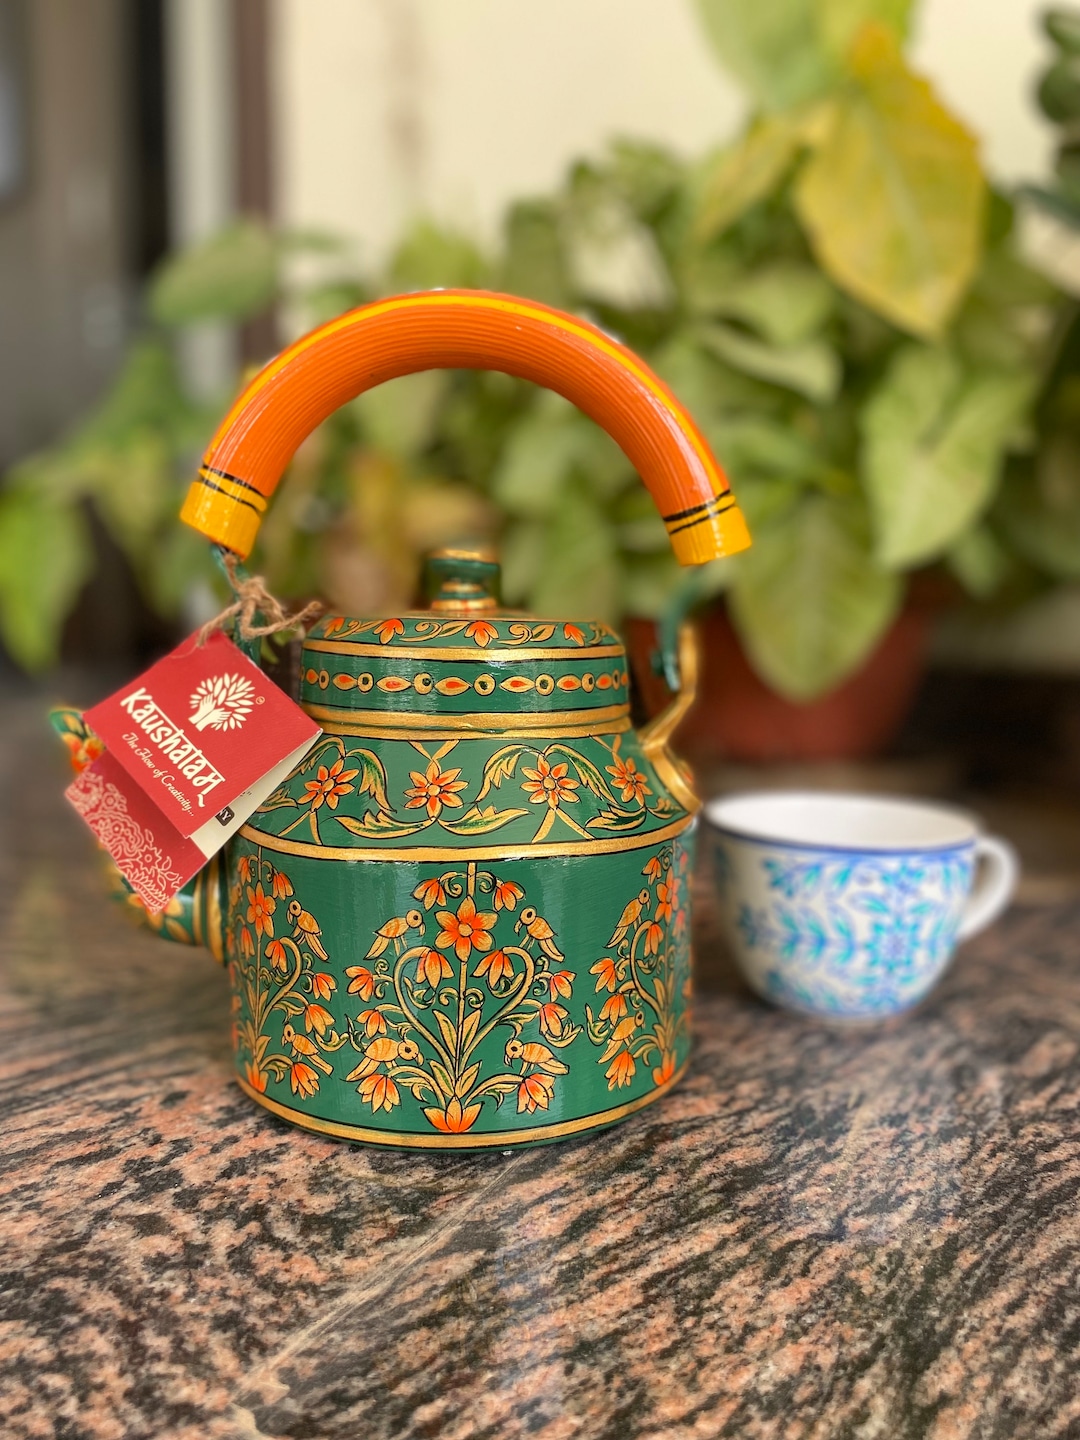 Pilaghanti - Hand Painted Chai Kettle Teapot in White, Green, & Yellow